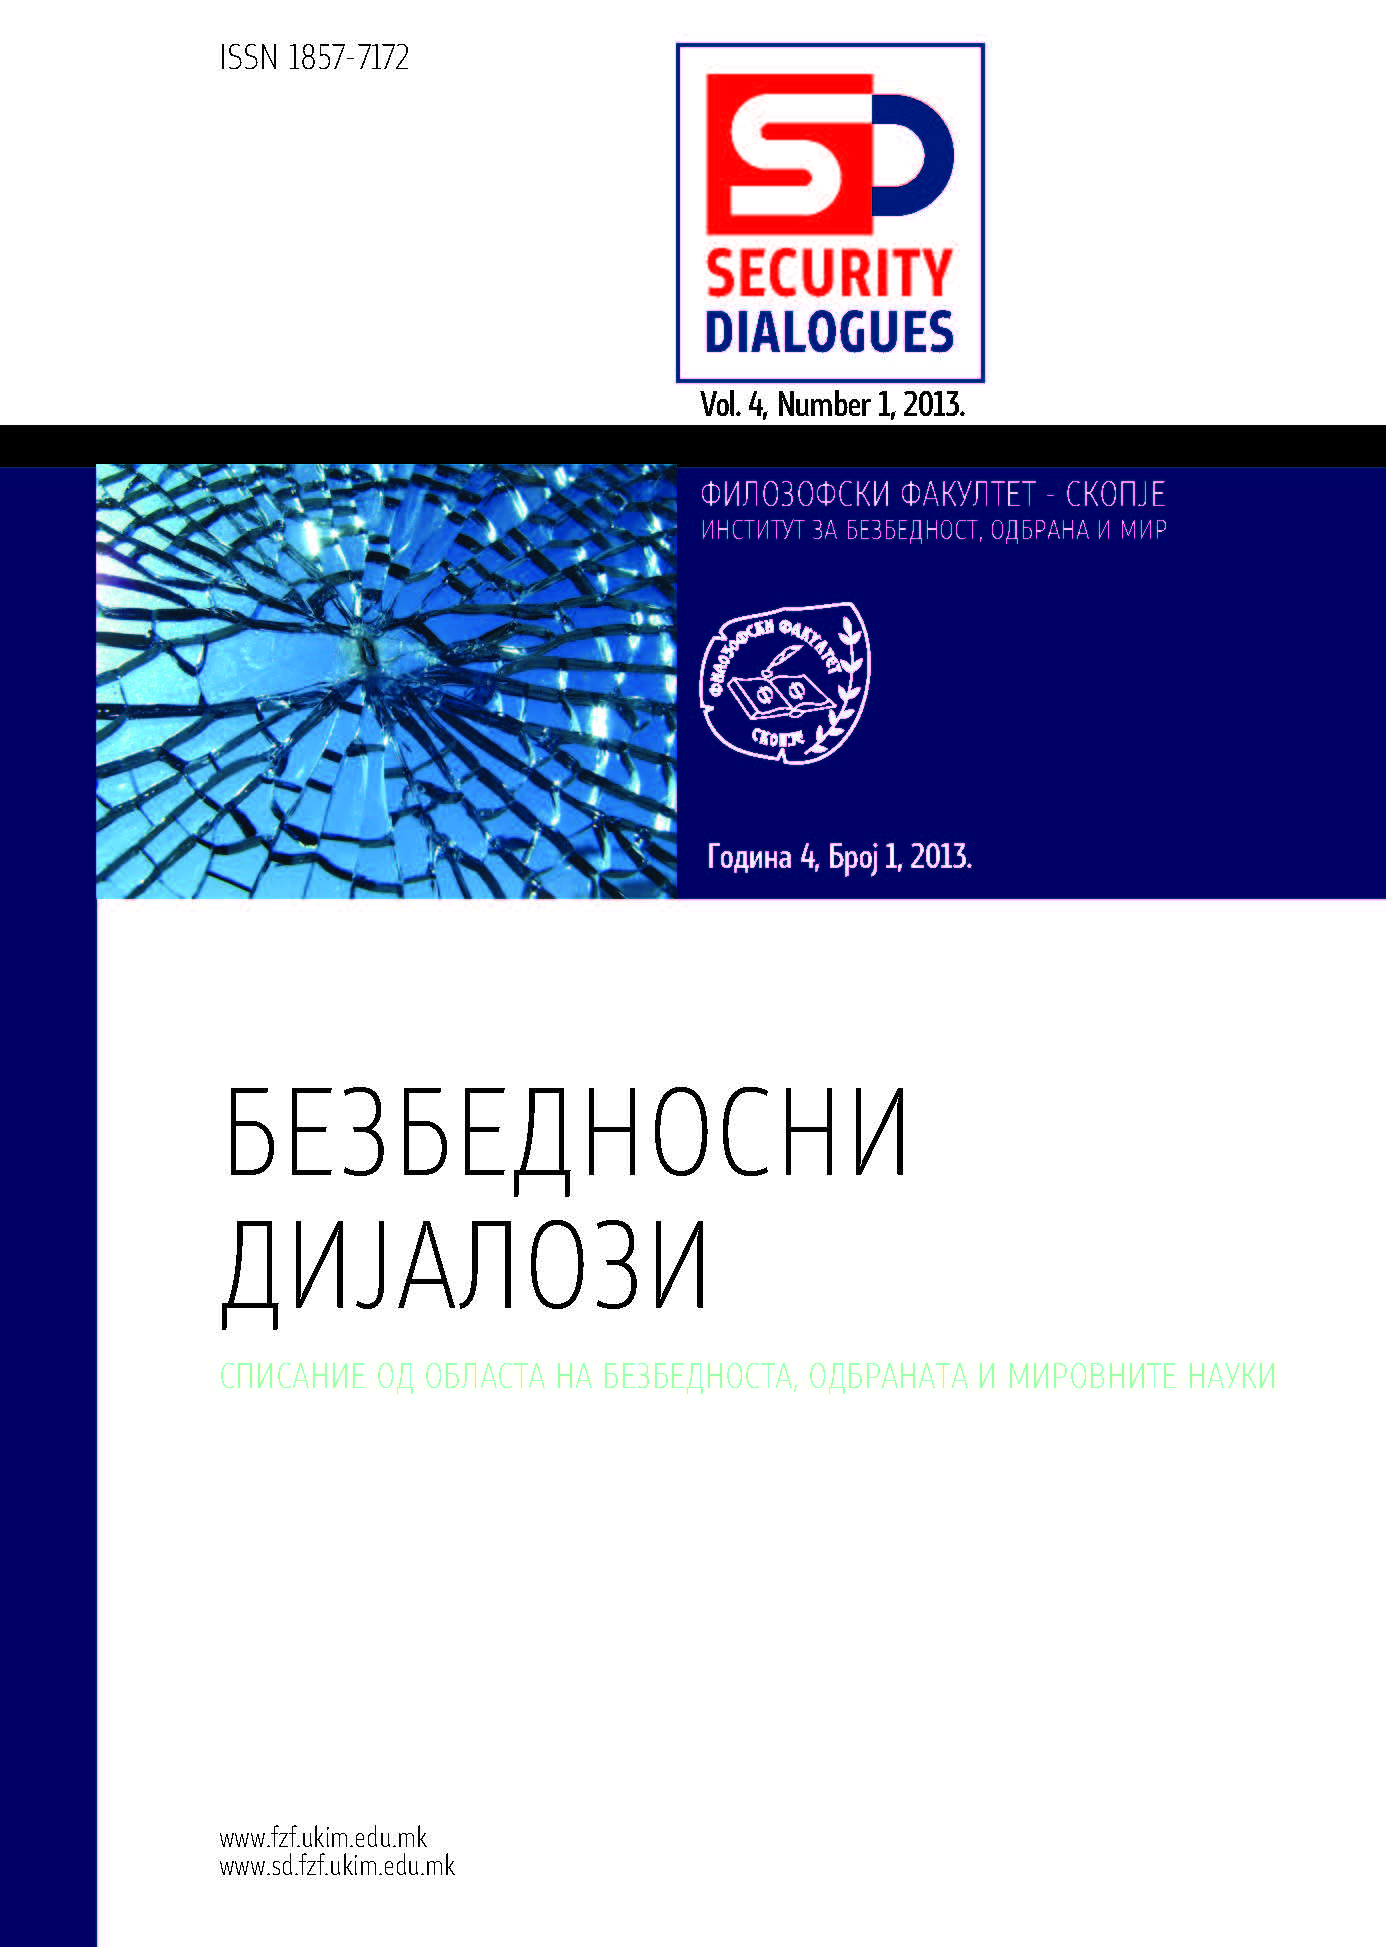 THE THREAT FROM NON-STATE ACTORS IN XXI CENTURY THROUGH THE LENSES ON THE KLAUZEVIC TRIAD Cover Image